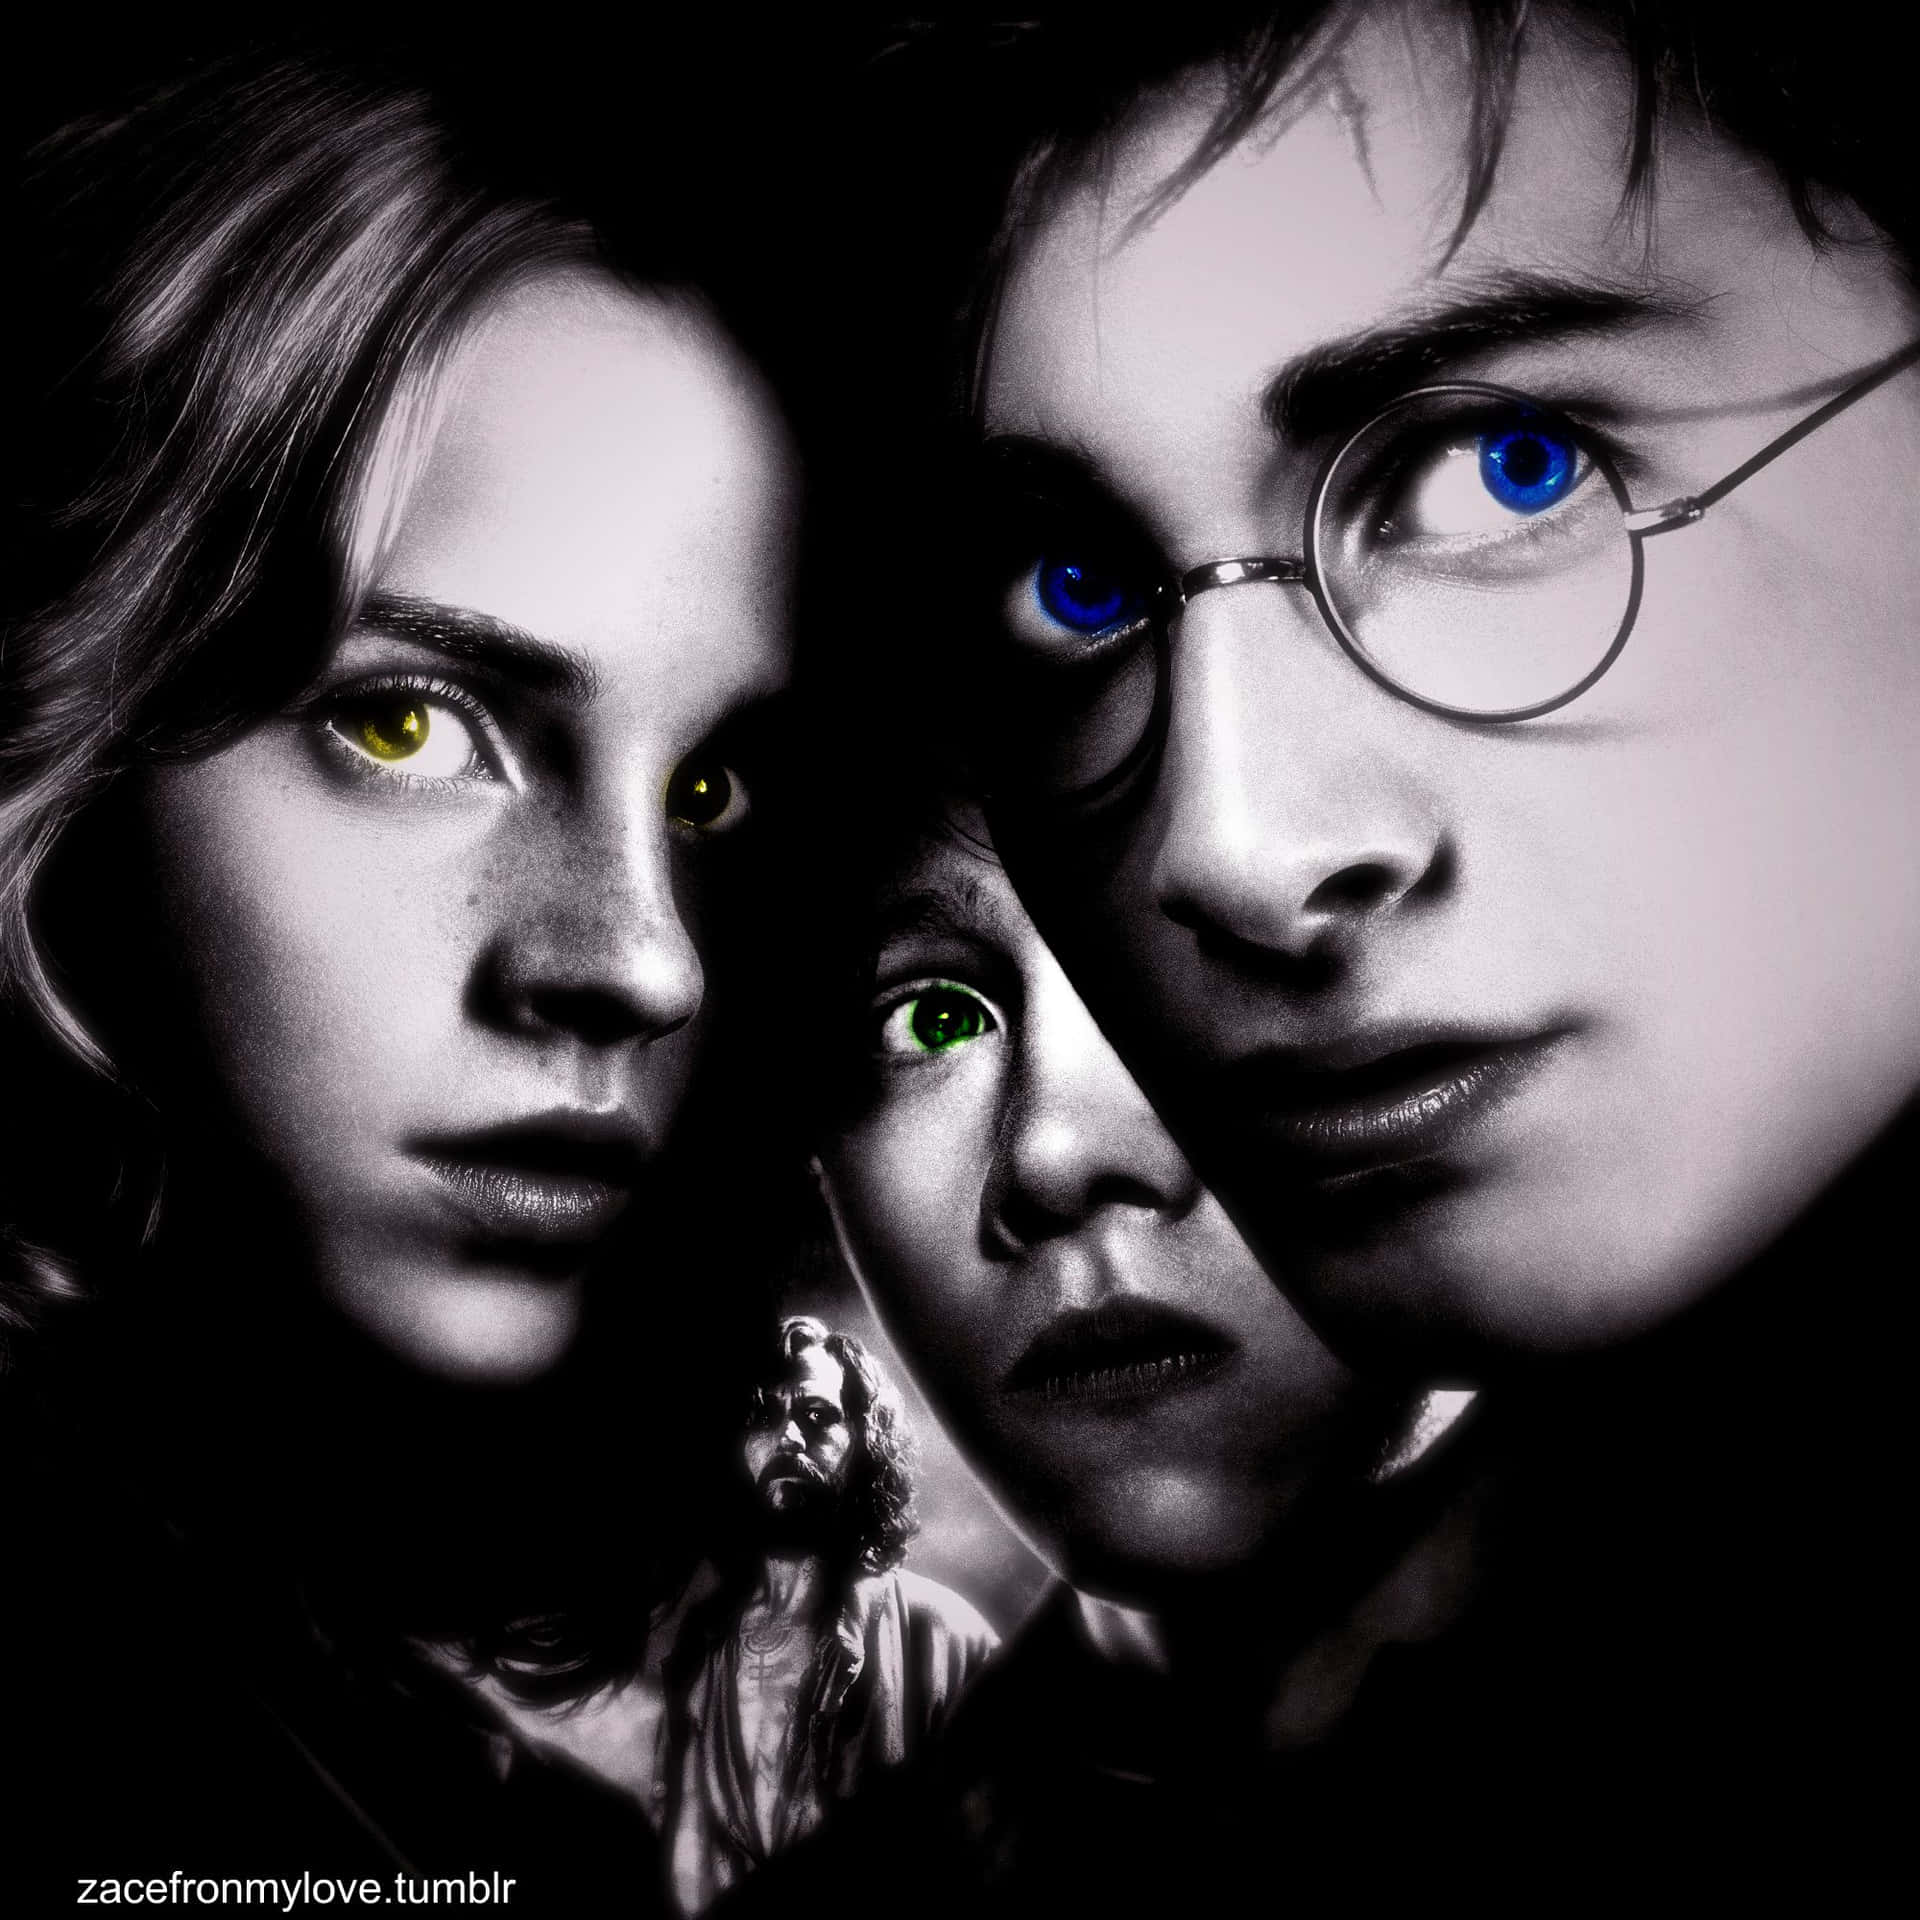 "The black and white magic of Harry Potter" Wallpaper